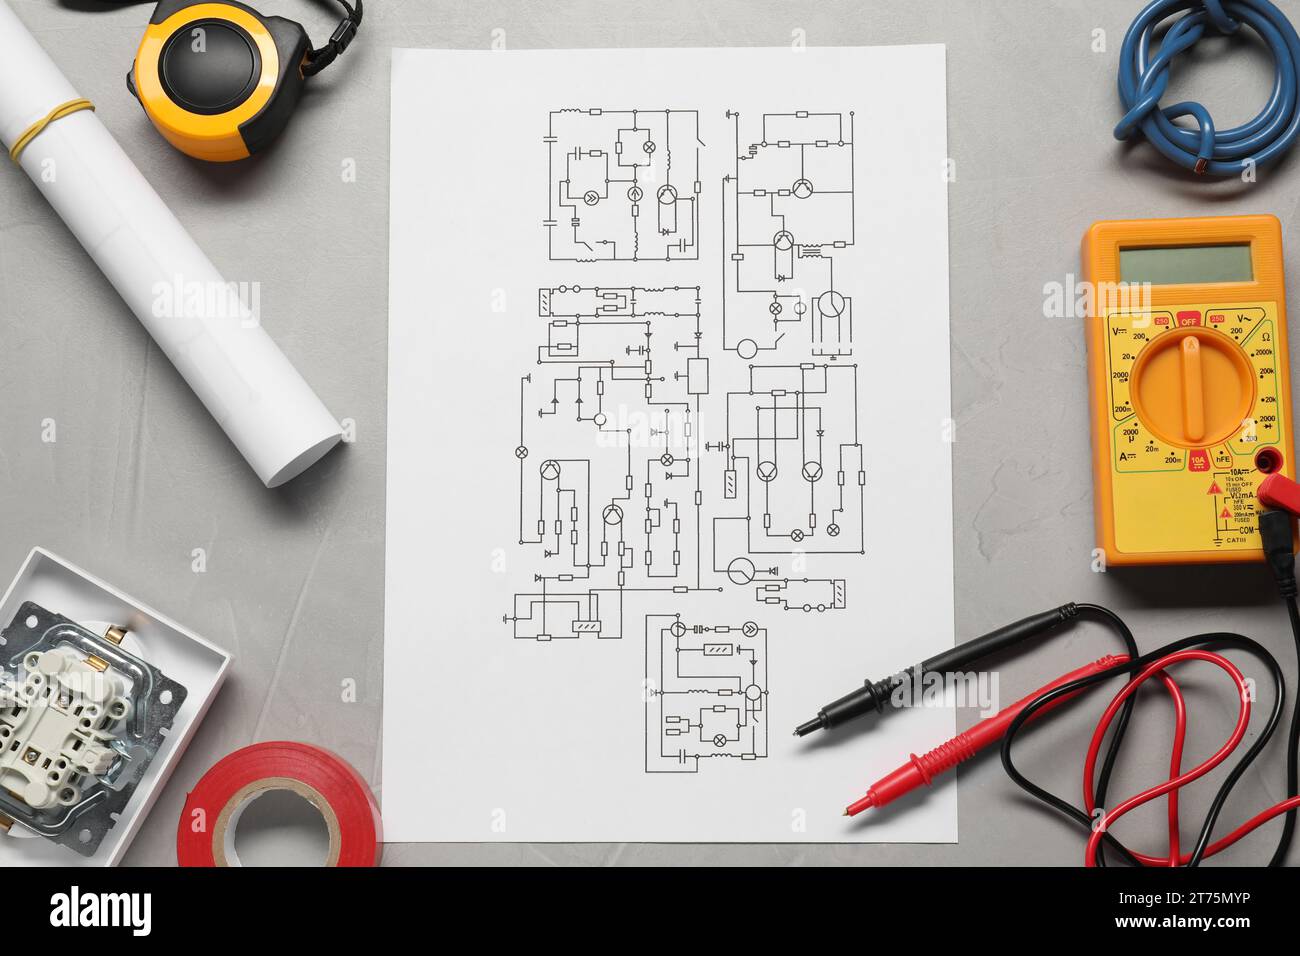 Wiring diagram, wires and digital multimeter on light grey table, flat lay Stock Photo